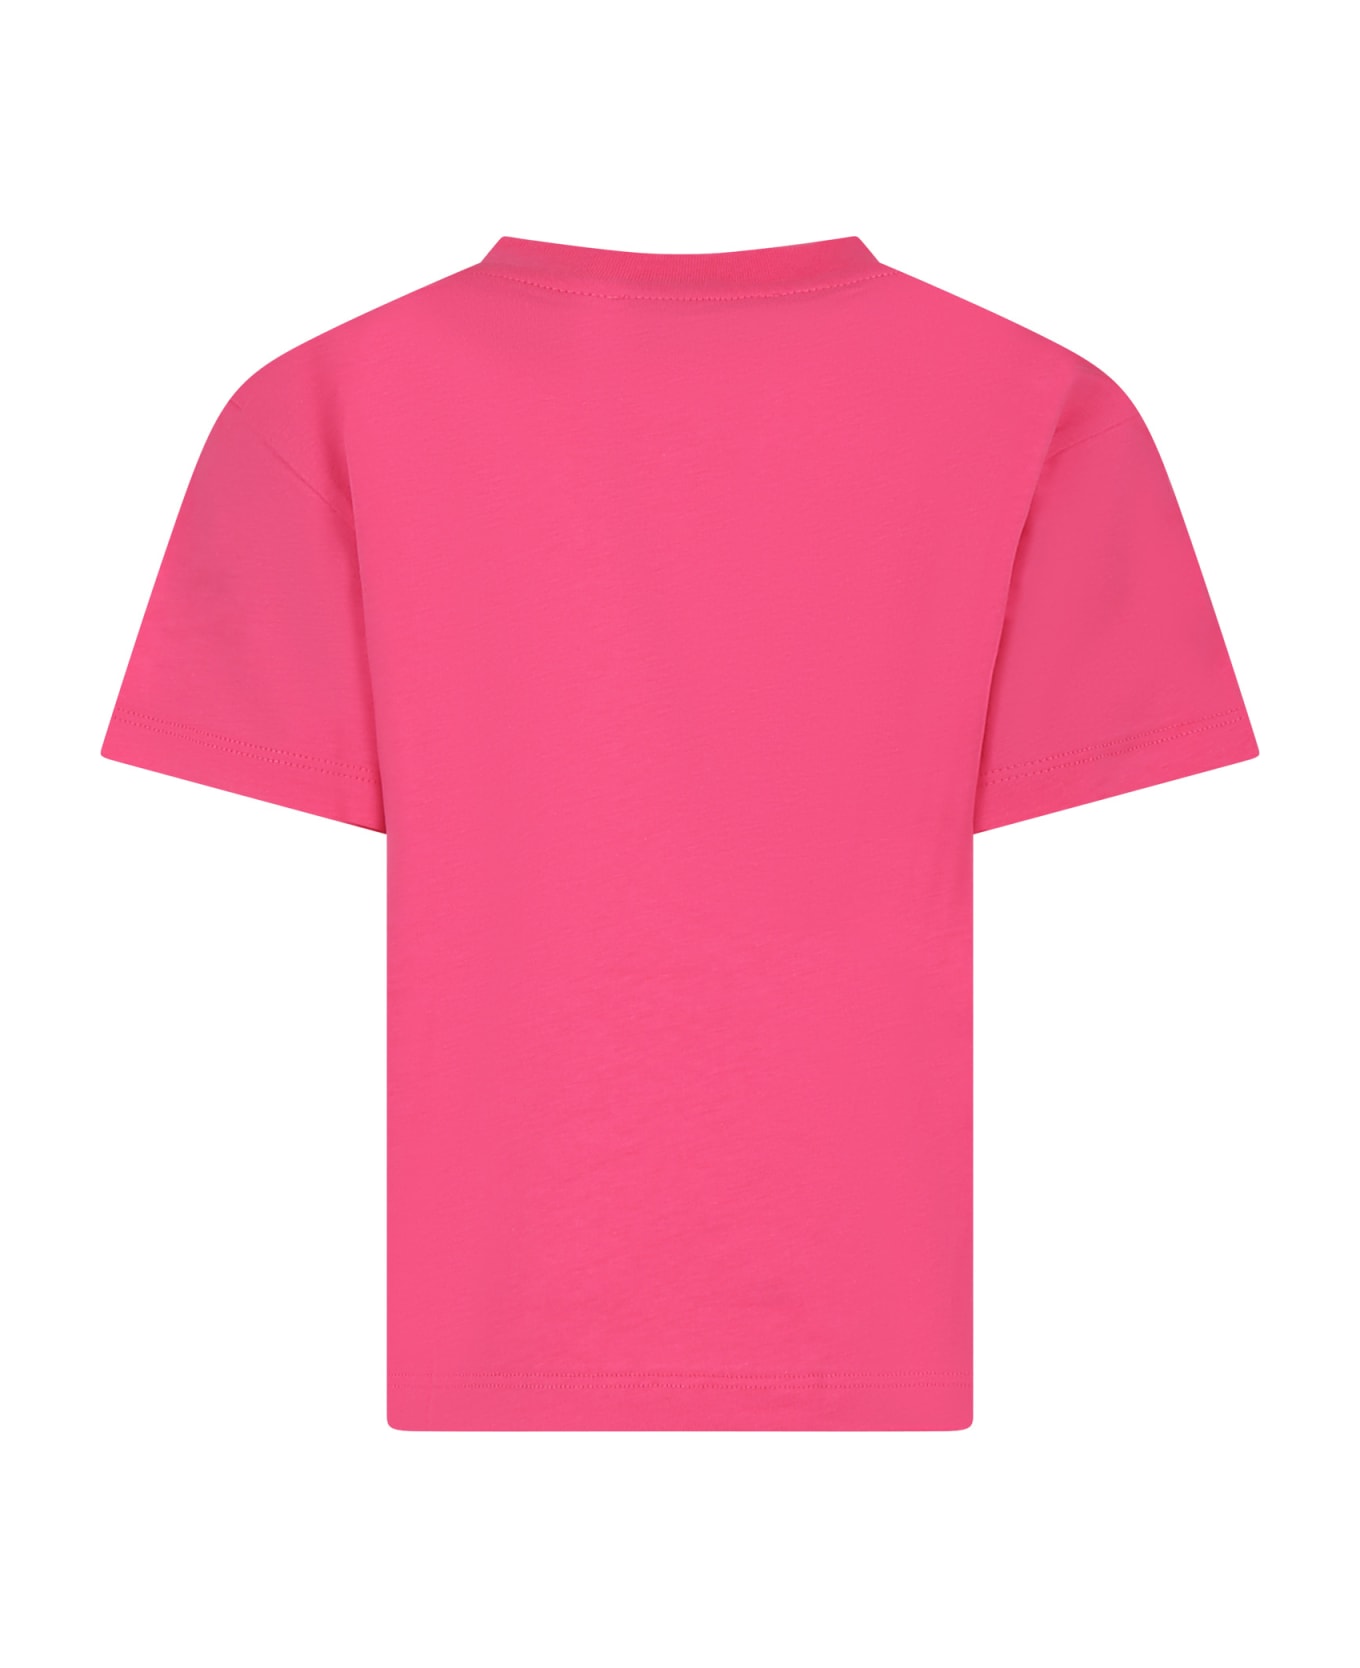 MSGM Fuchsia T-shirt For Kids With Logo - Rosa Fluo